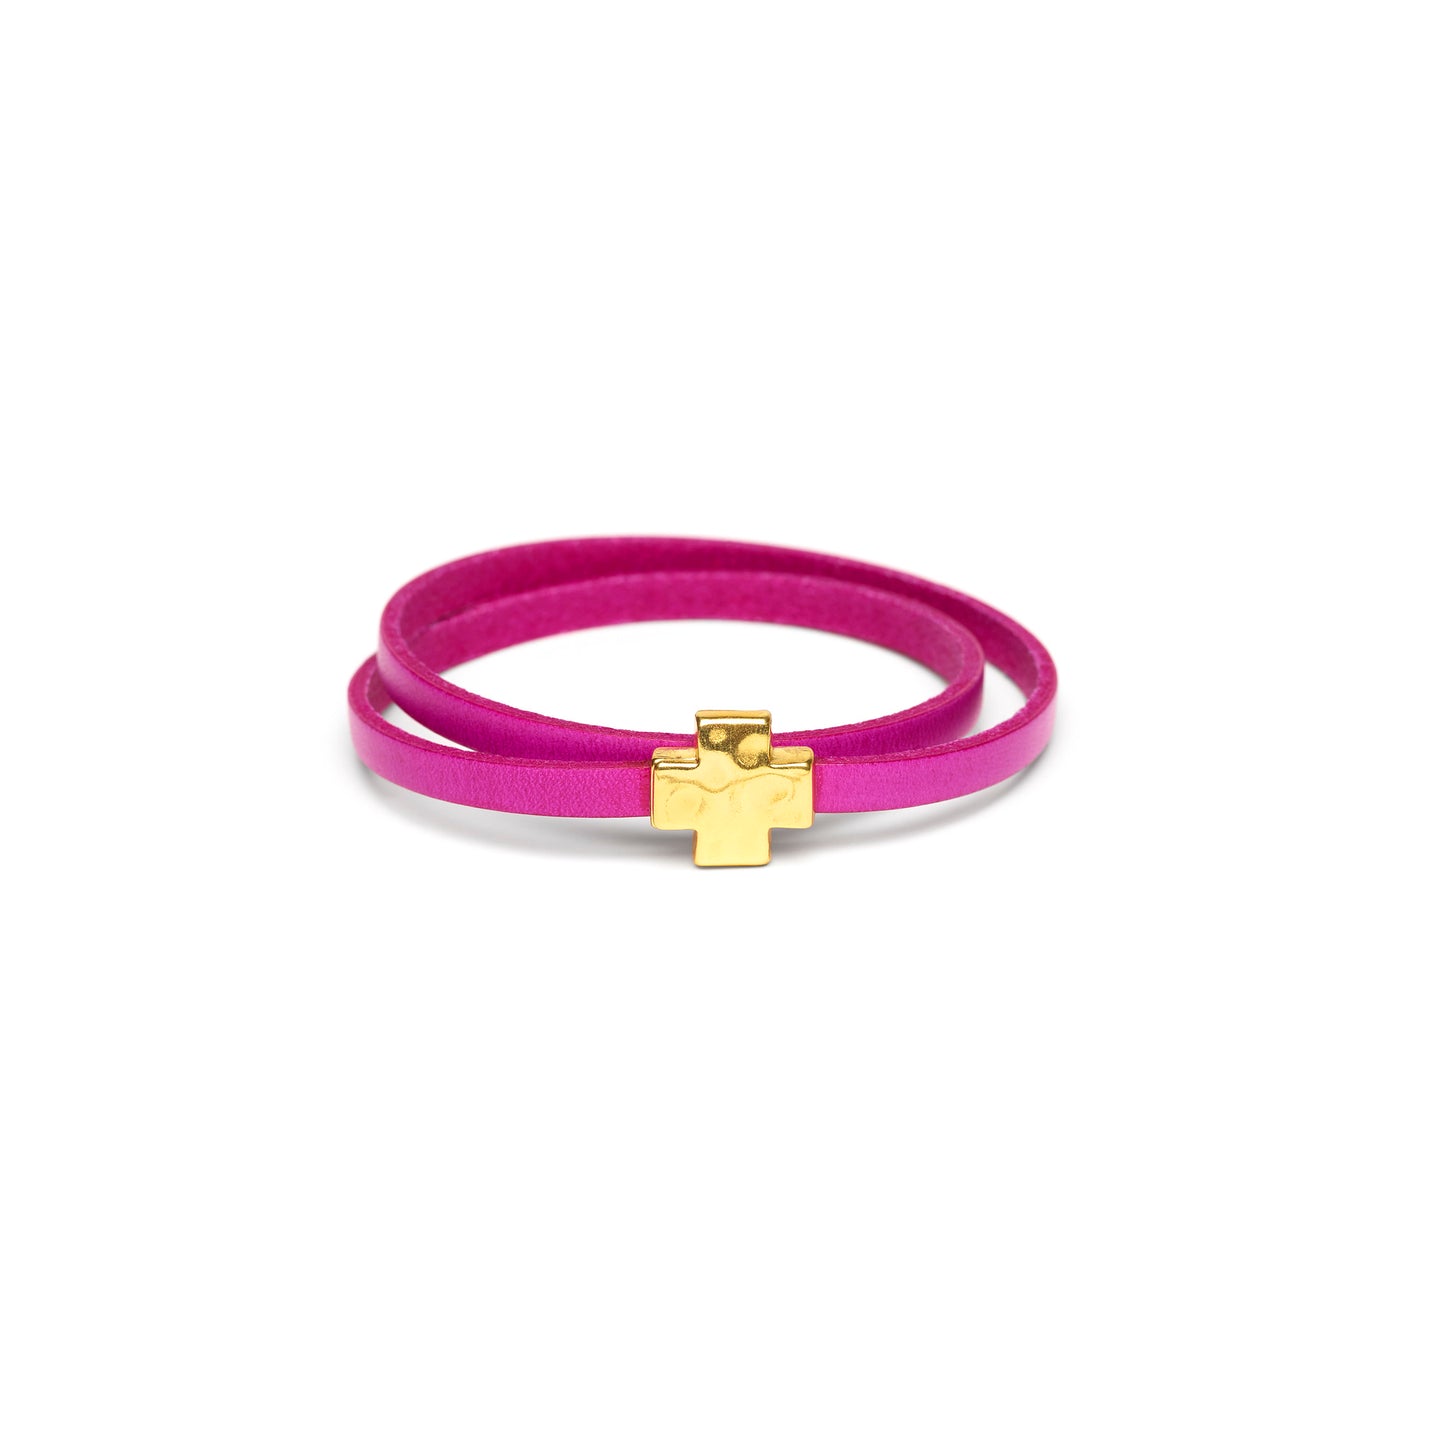 "Wrap it Up Bracelet" with Gold Cross - Double Length - Hot Pink